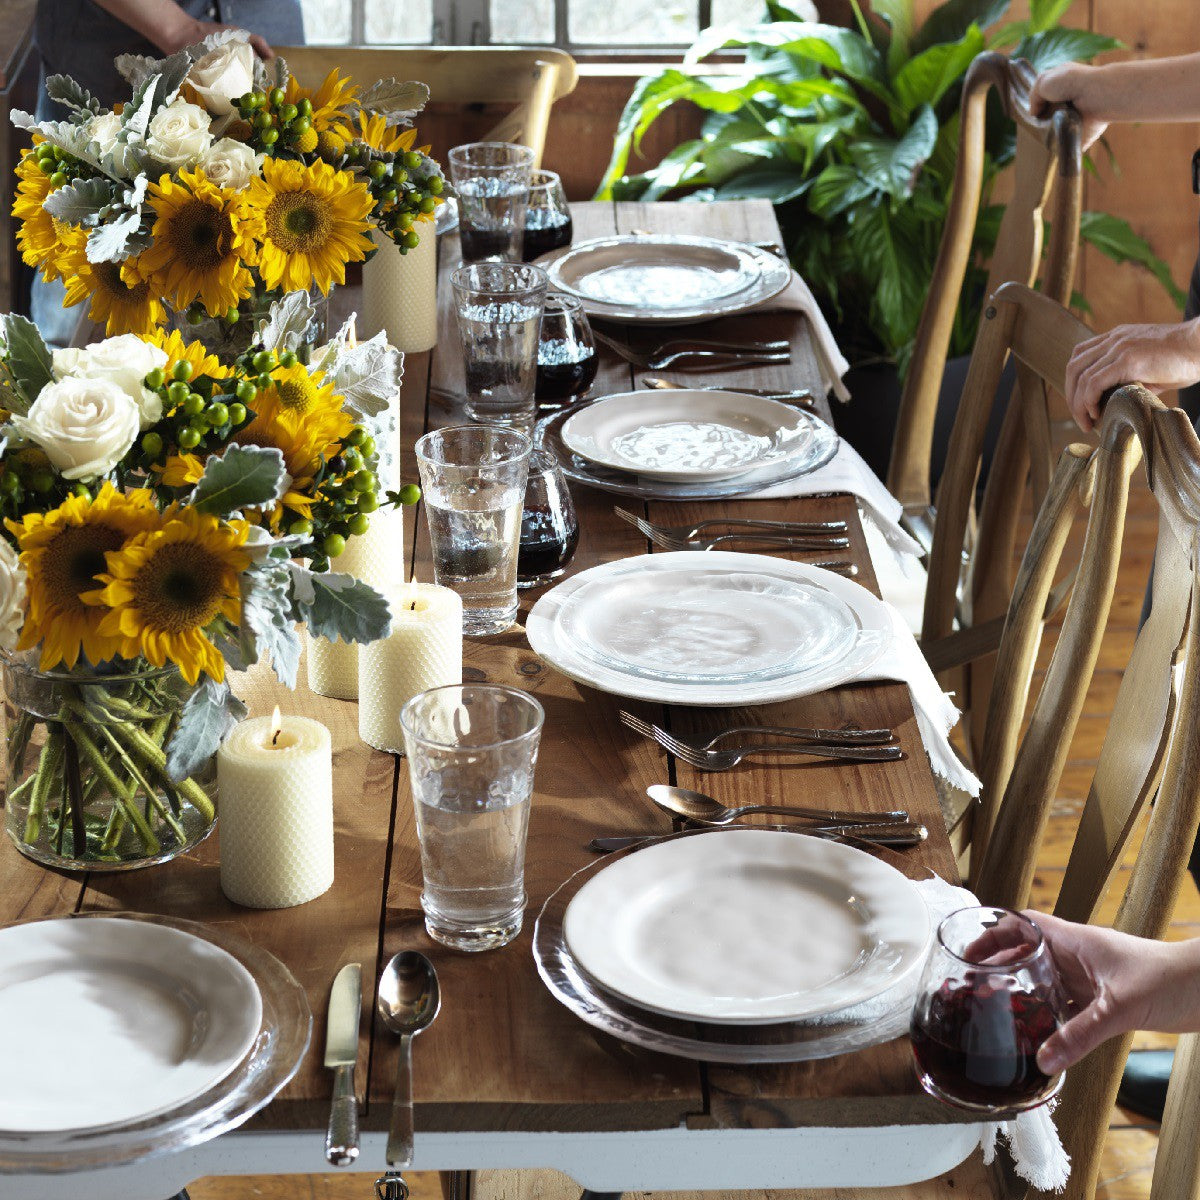 table setting on a rustic wooden table with glasses, flatware, candles and sunflowers.